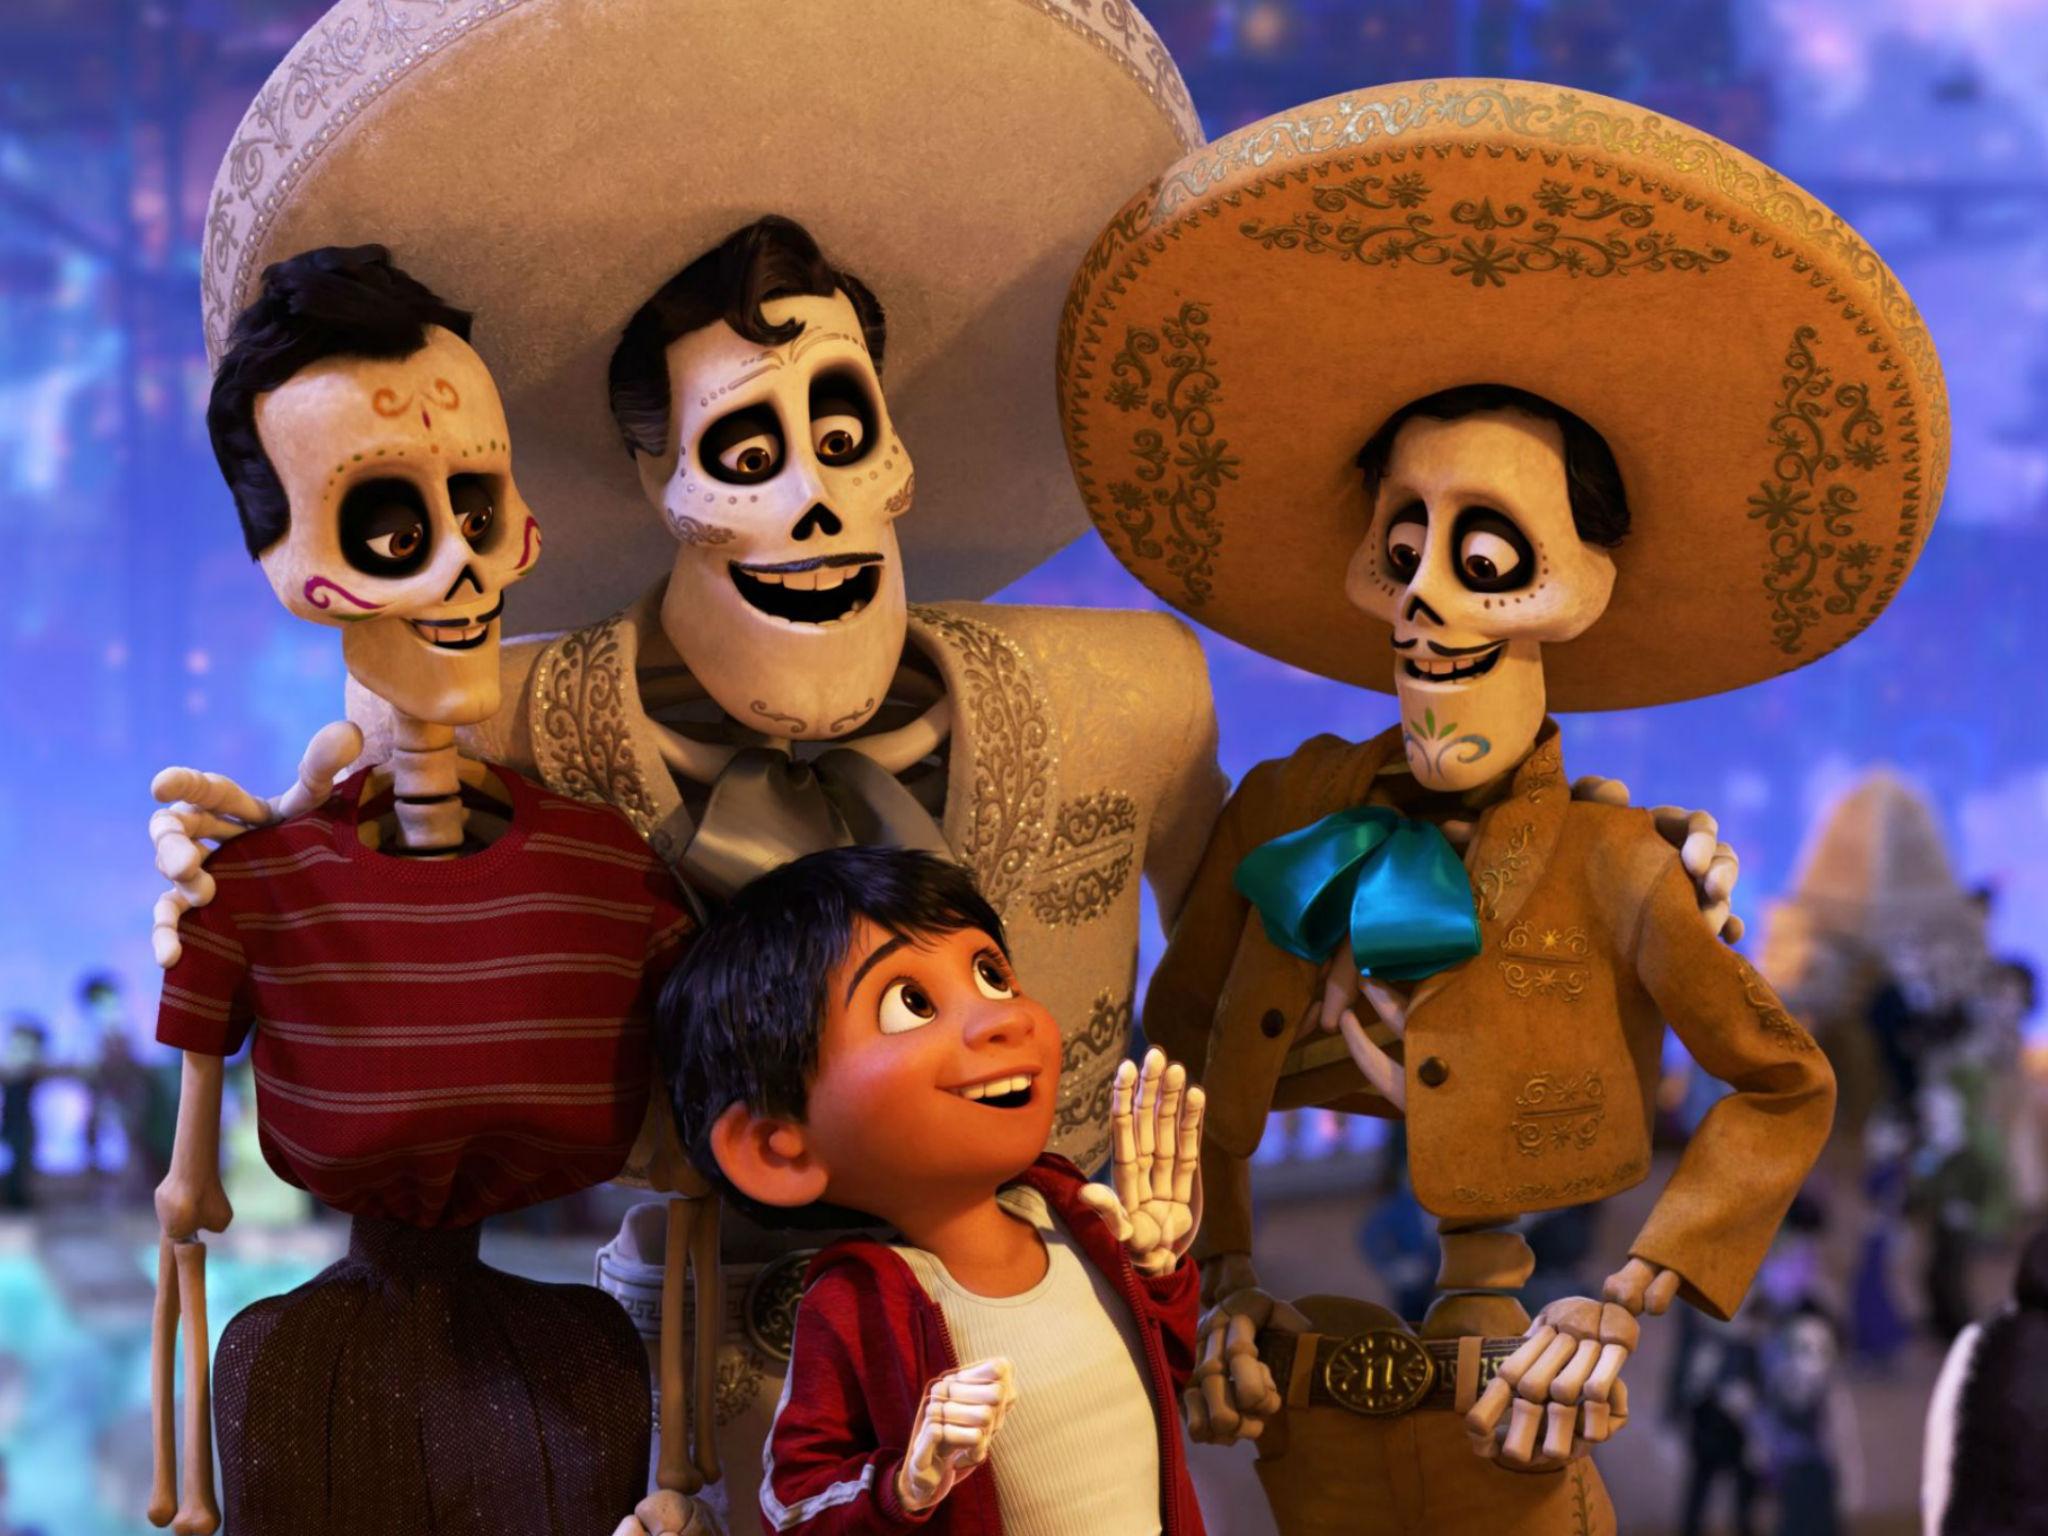 Coco director Lee Unkrich on making adults cry: 'Pixar doesn't